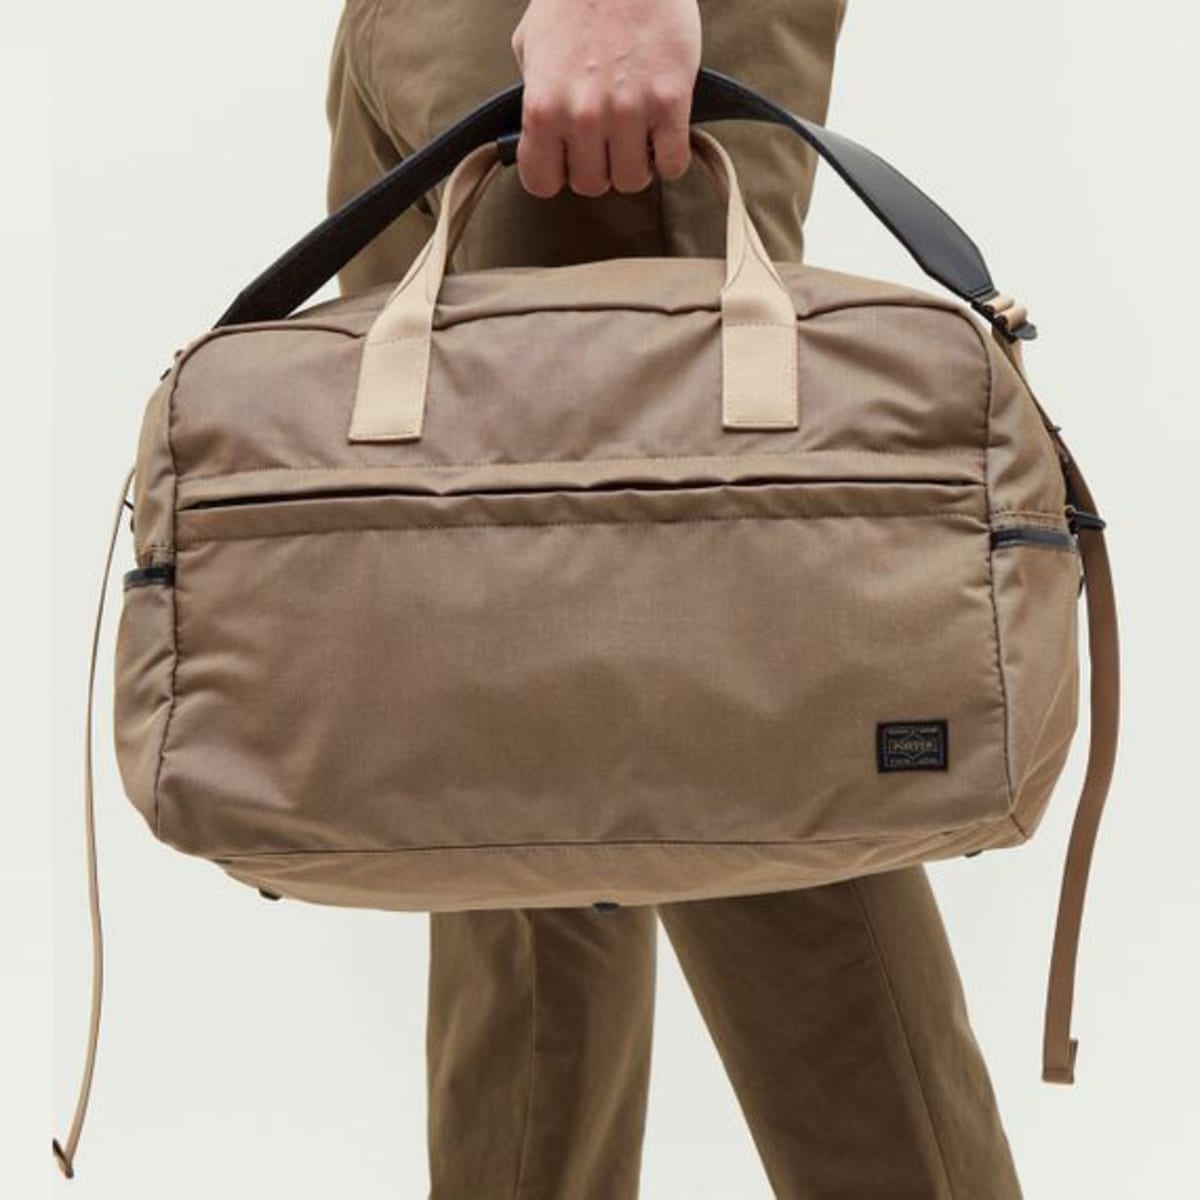 Monocle's new Porter Bag is perfectly sized for two-day getaways